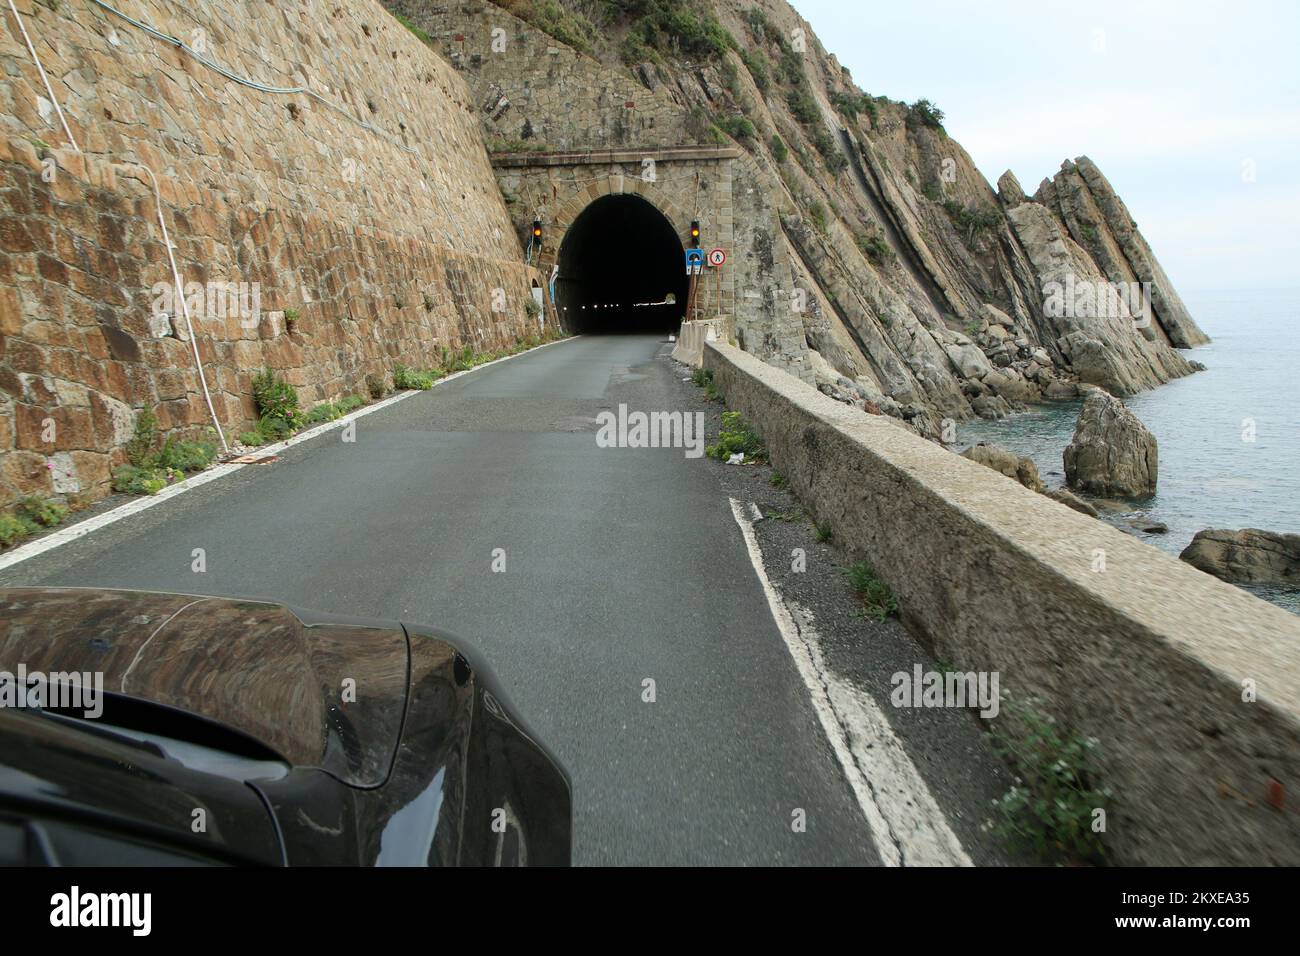 Driving the car towards the narrow coastline one way tunnel on the Strada delle Gallerie near Sestri Levante in Italy during the vacation trip. Stock Photo